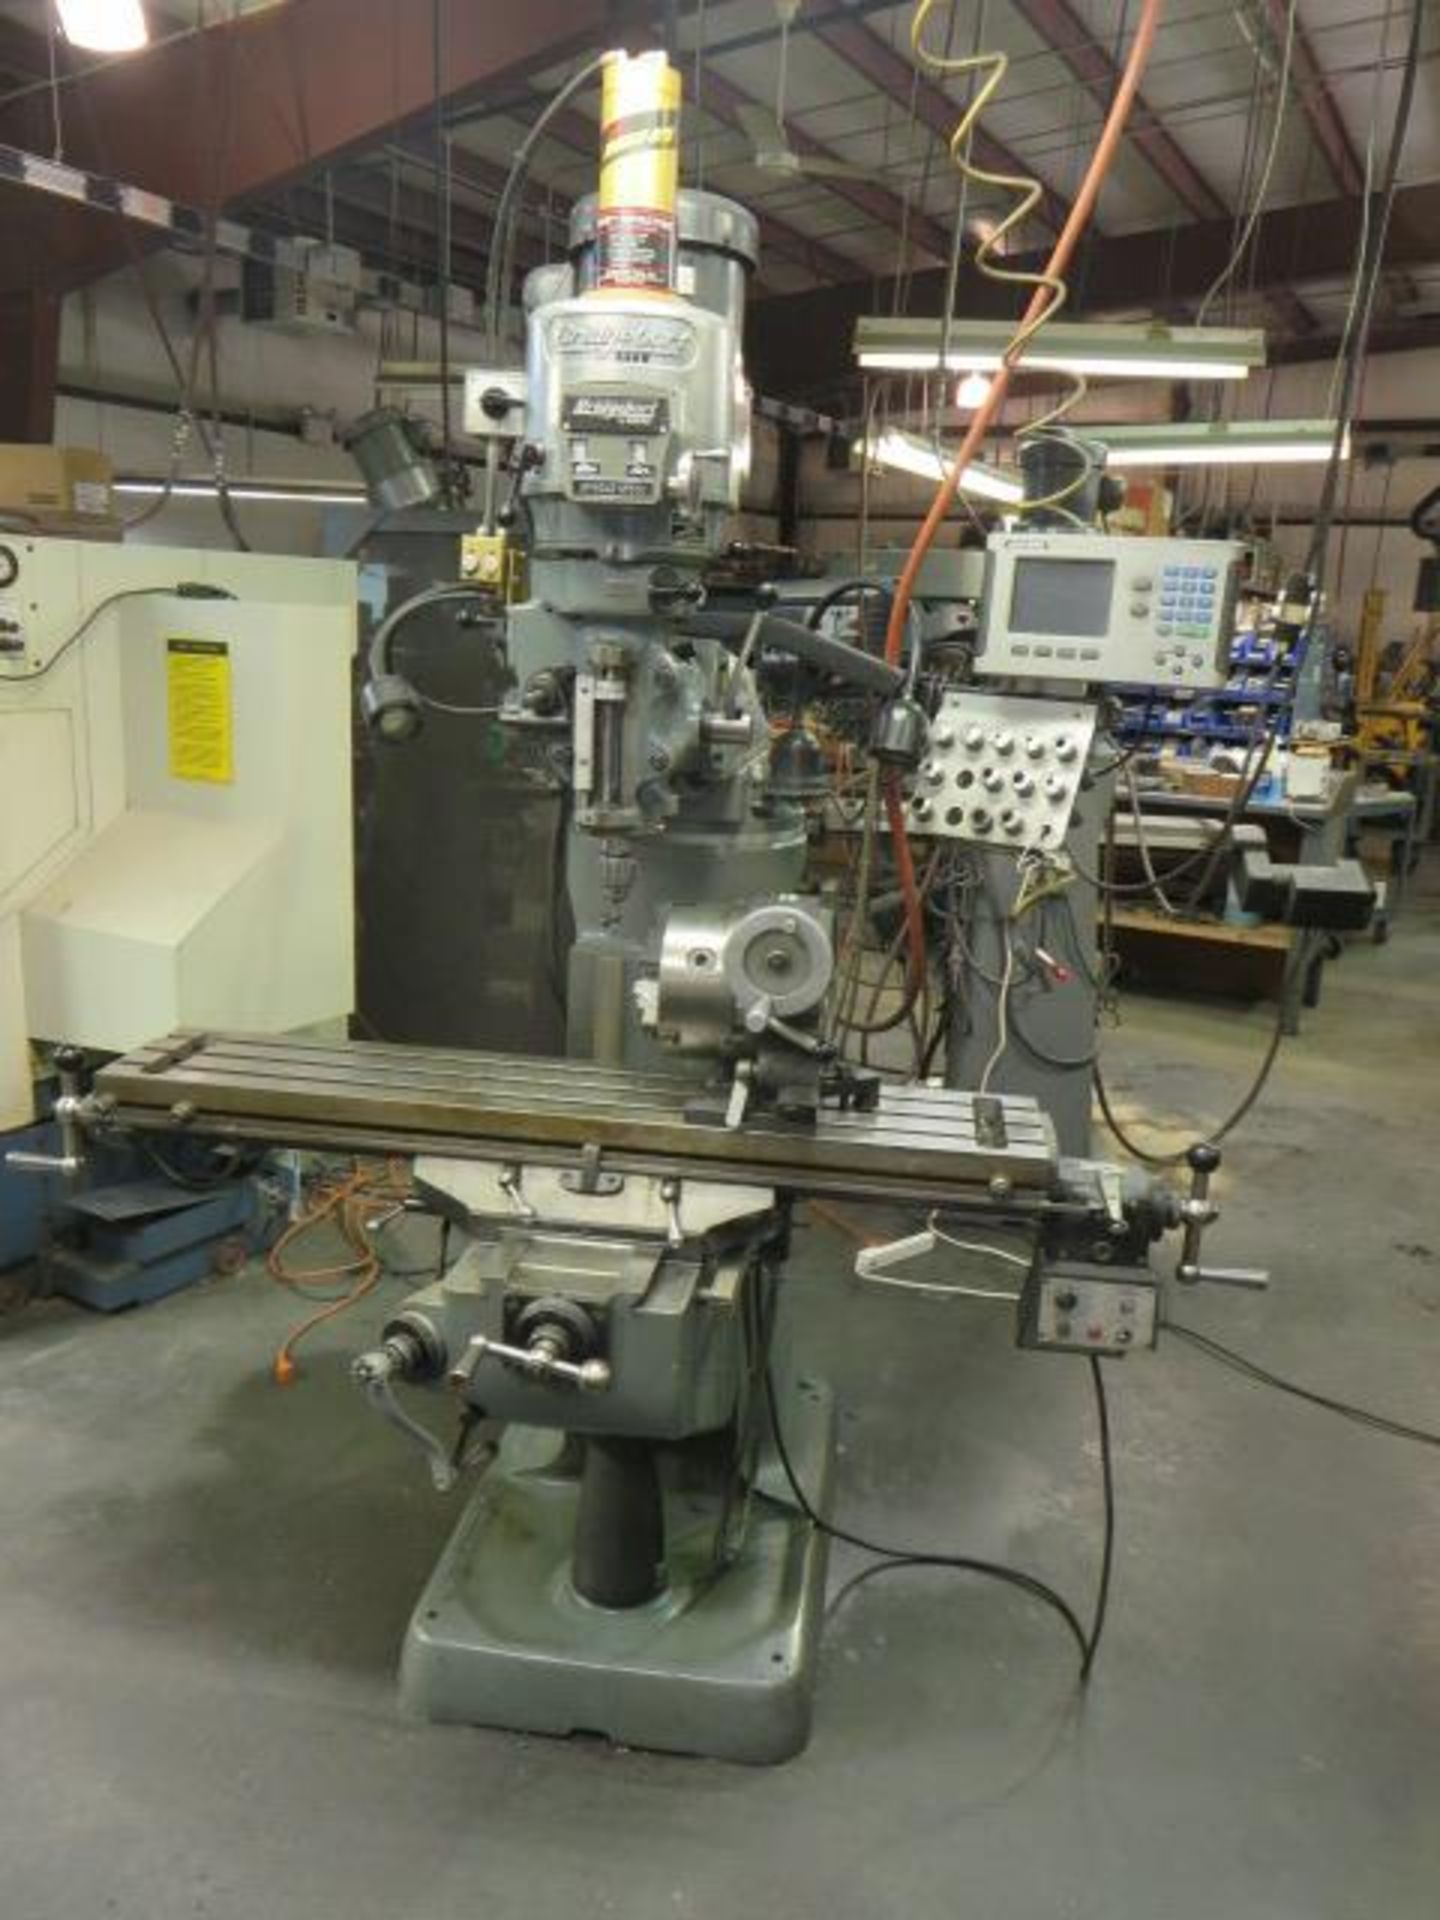 2008 BRIDGEPORT (HARDINGE) 2J VS VERTICAL MILL, S/N HDNG 3926, 2HP, 9 IN. X 48 IN. PF TABLE WITH… - Image 5 of 5